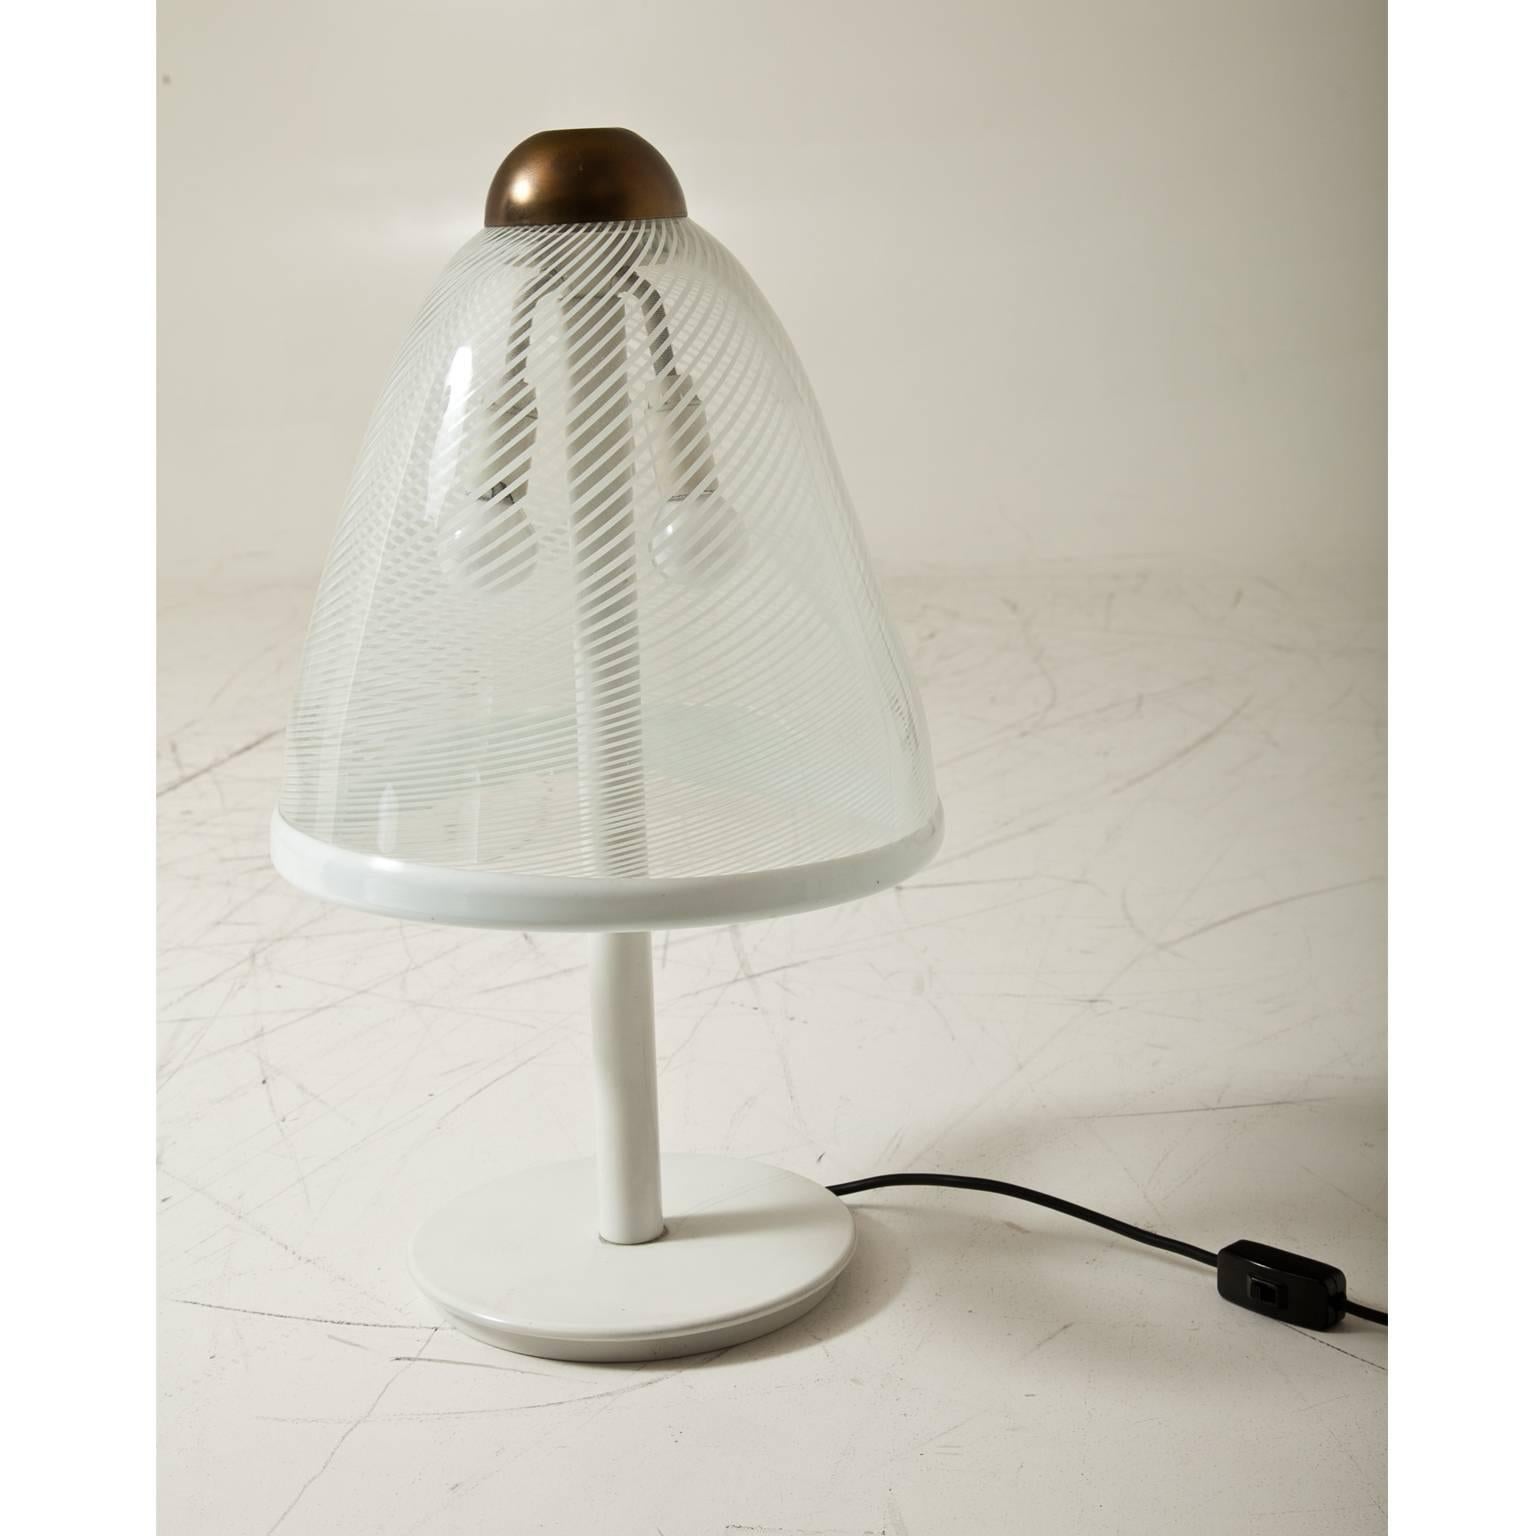 Large table lamp with lampshade out of Murano glass with a white spiral pattern and copper-colored top. Three lightbulbs.

For the electrification we assume no liability and no warranty.